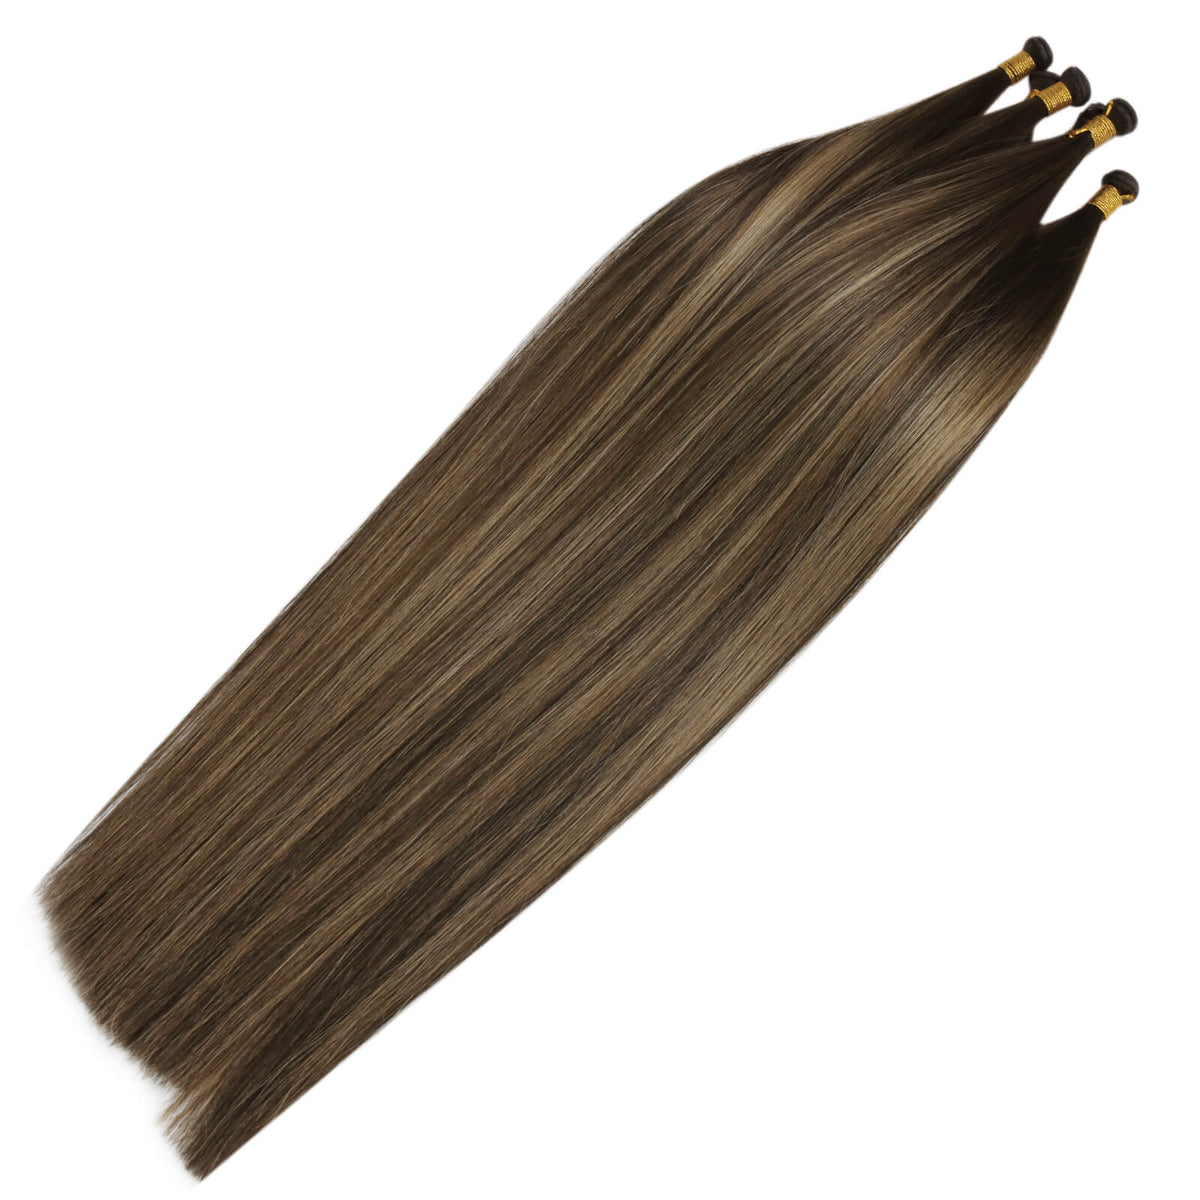 Genius Wefts Human Hair Extensions Silky Straight